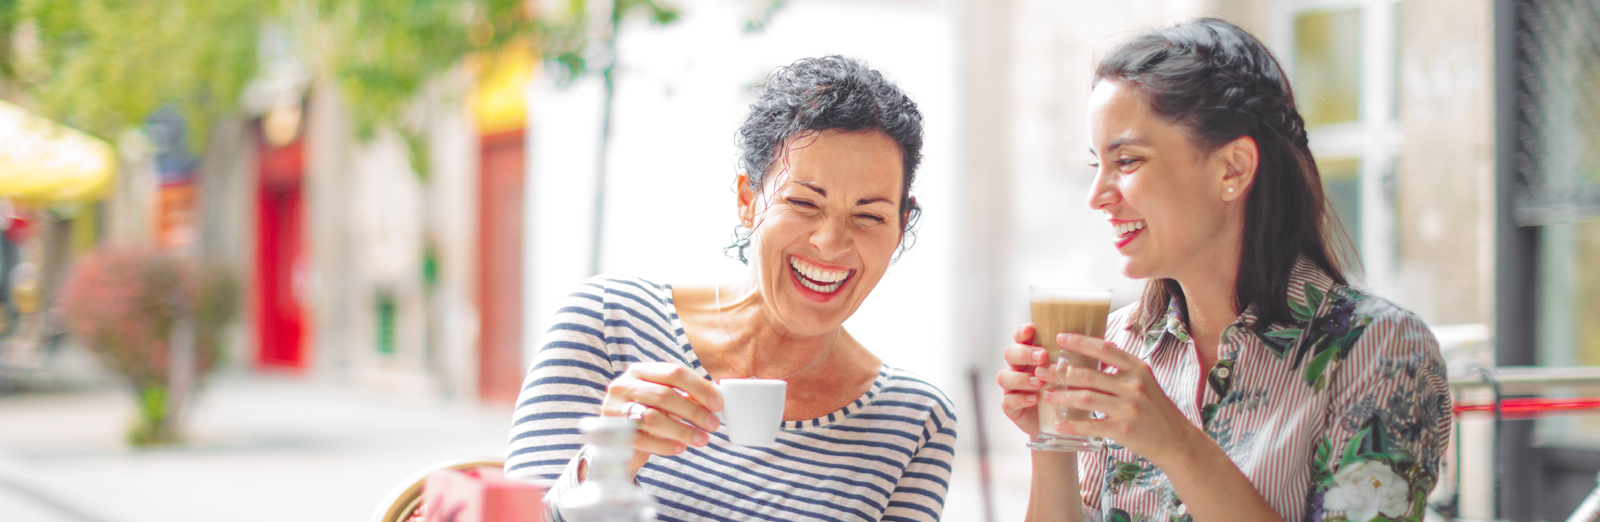 women-laughing-together-outside-1600x522.png